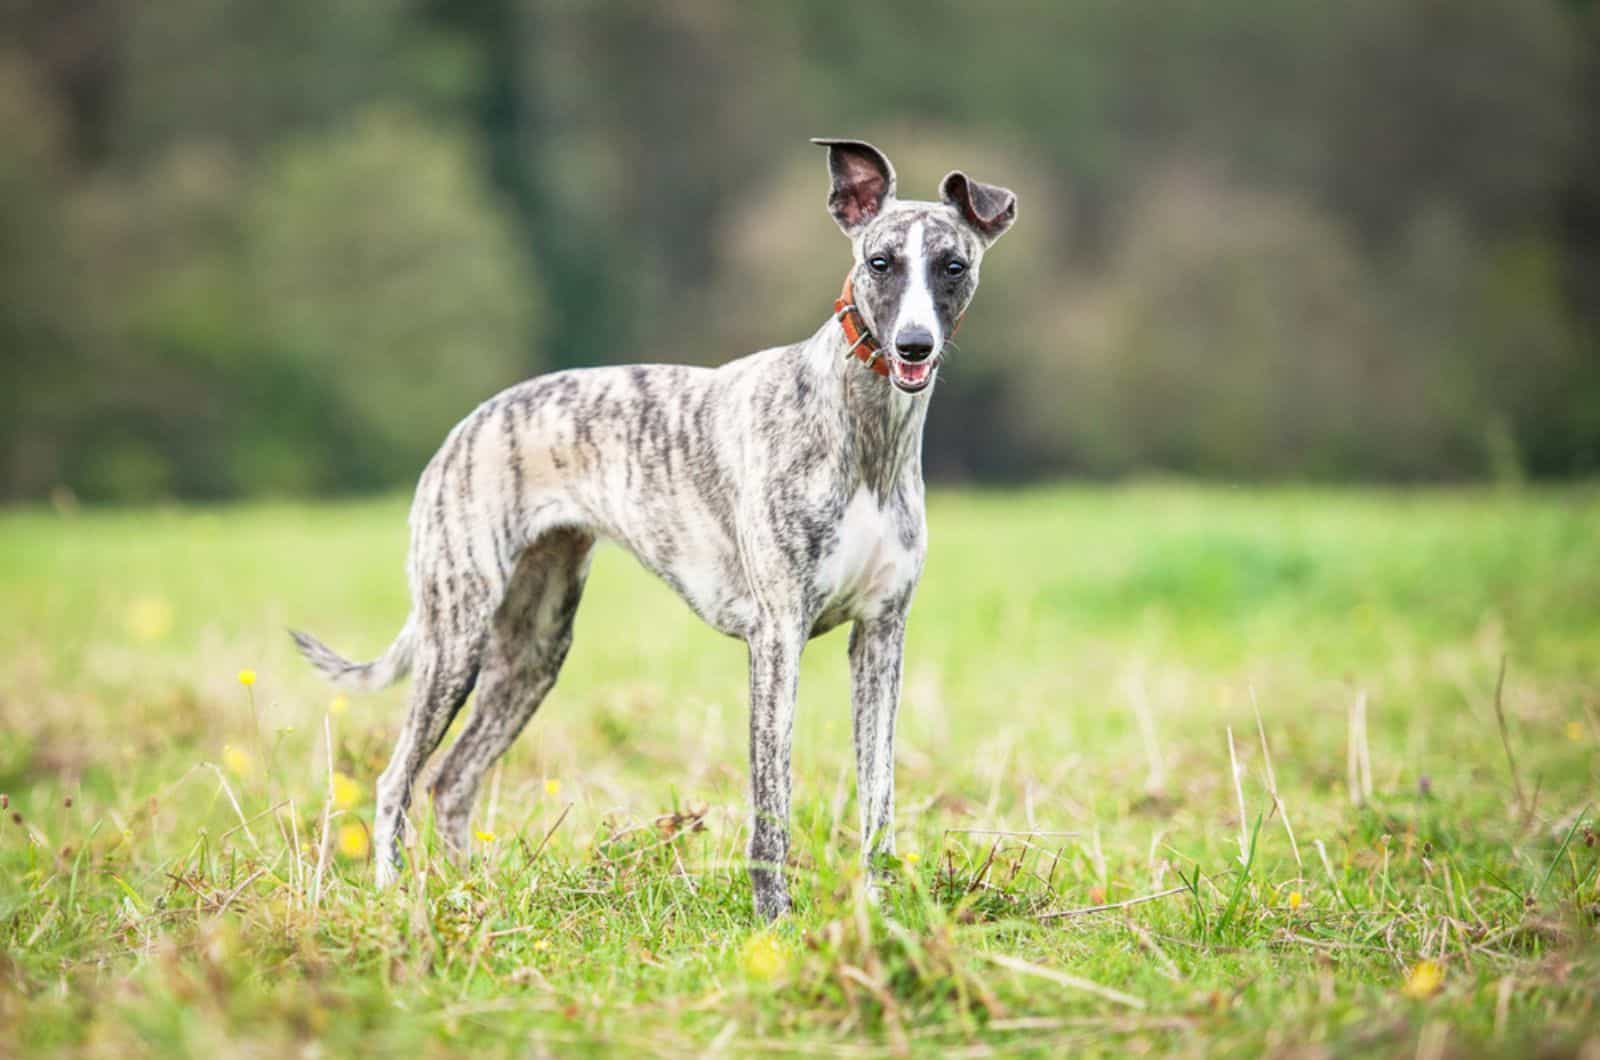 whippet dog in nature